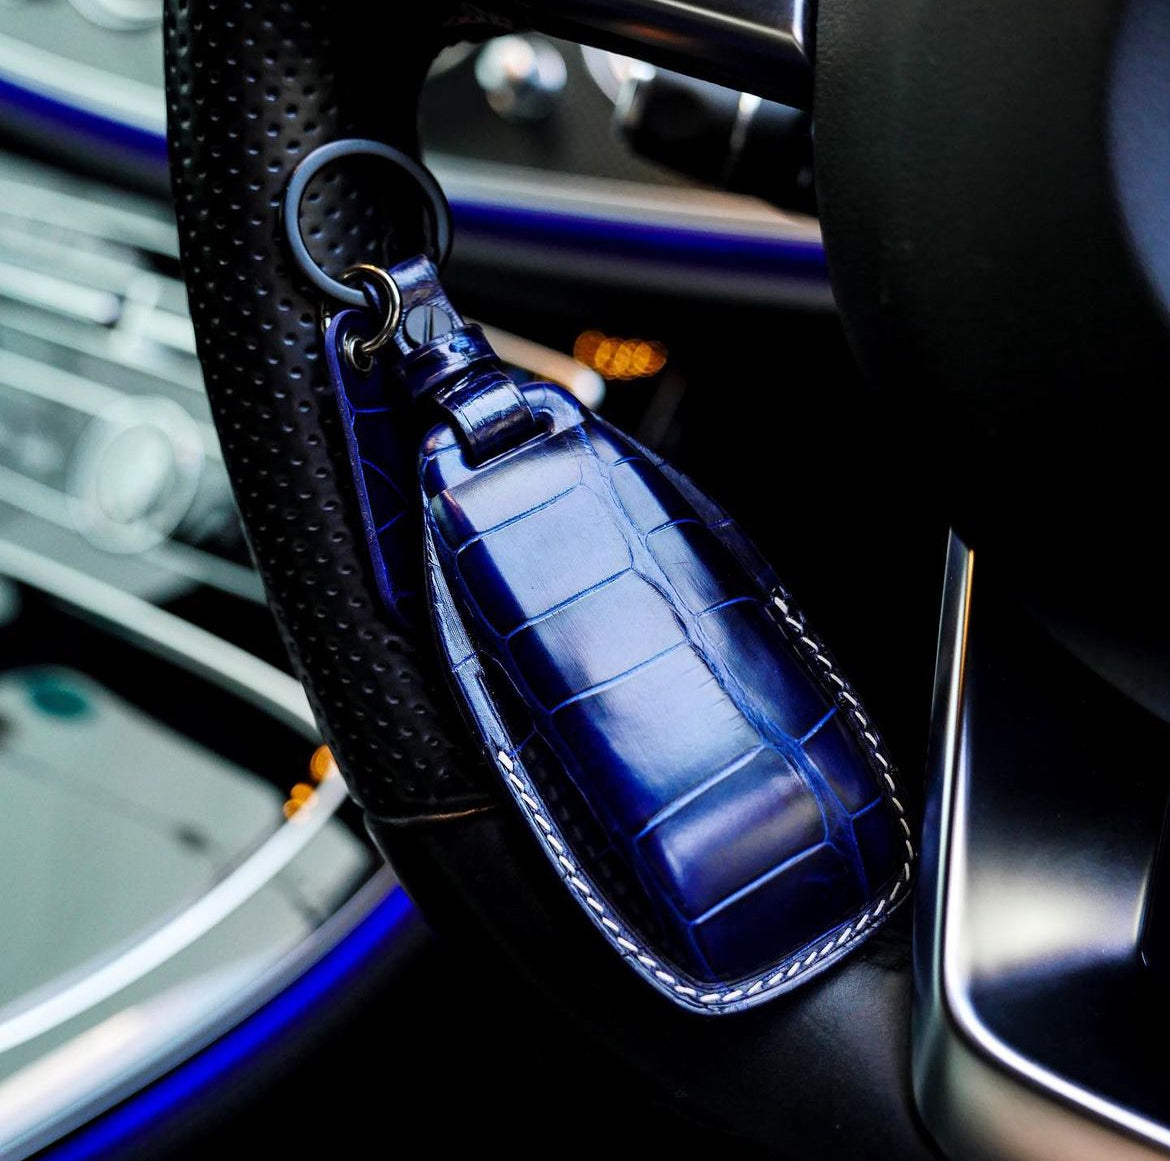 Mercedes Key Fob Cover Type 2 - CUSTOMIZE YOURS